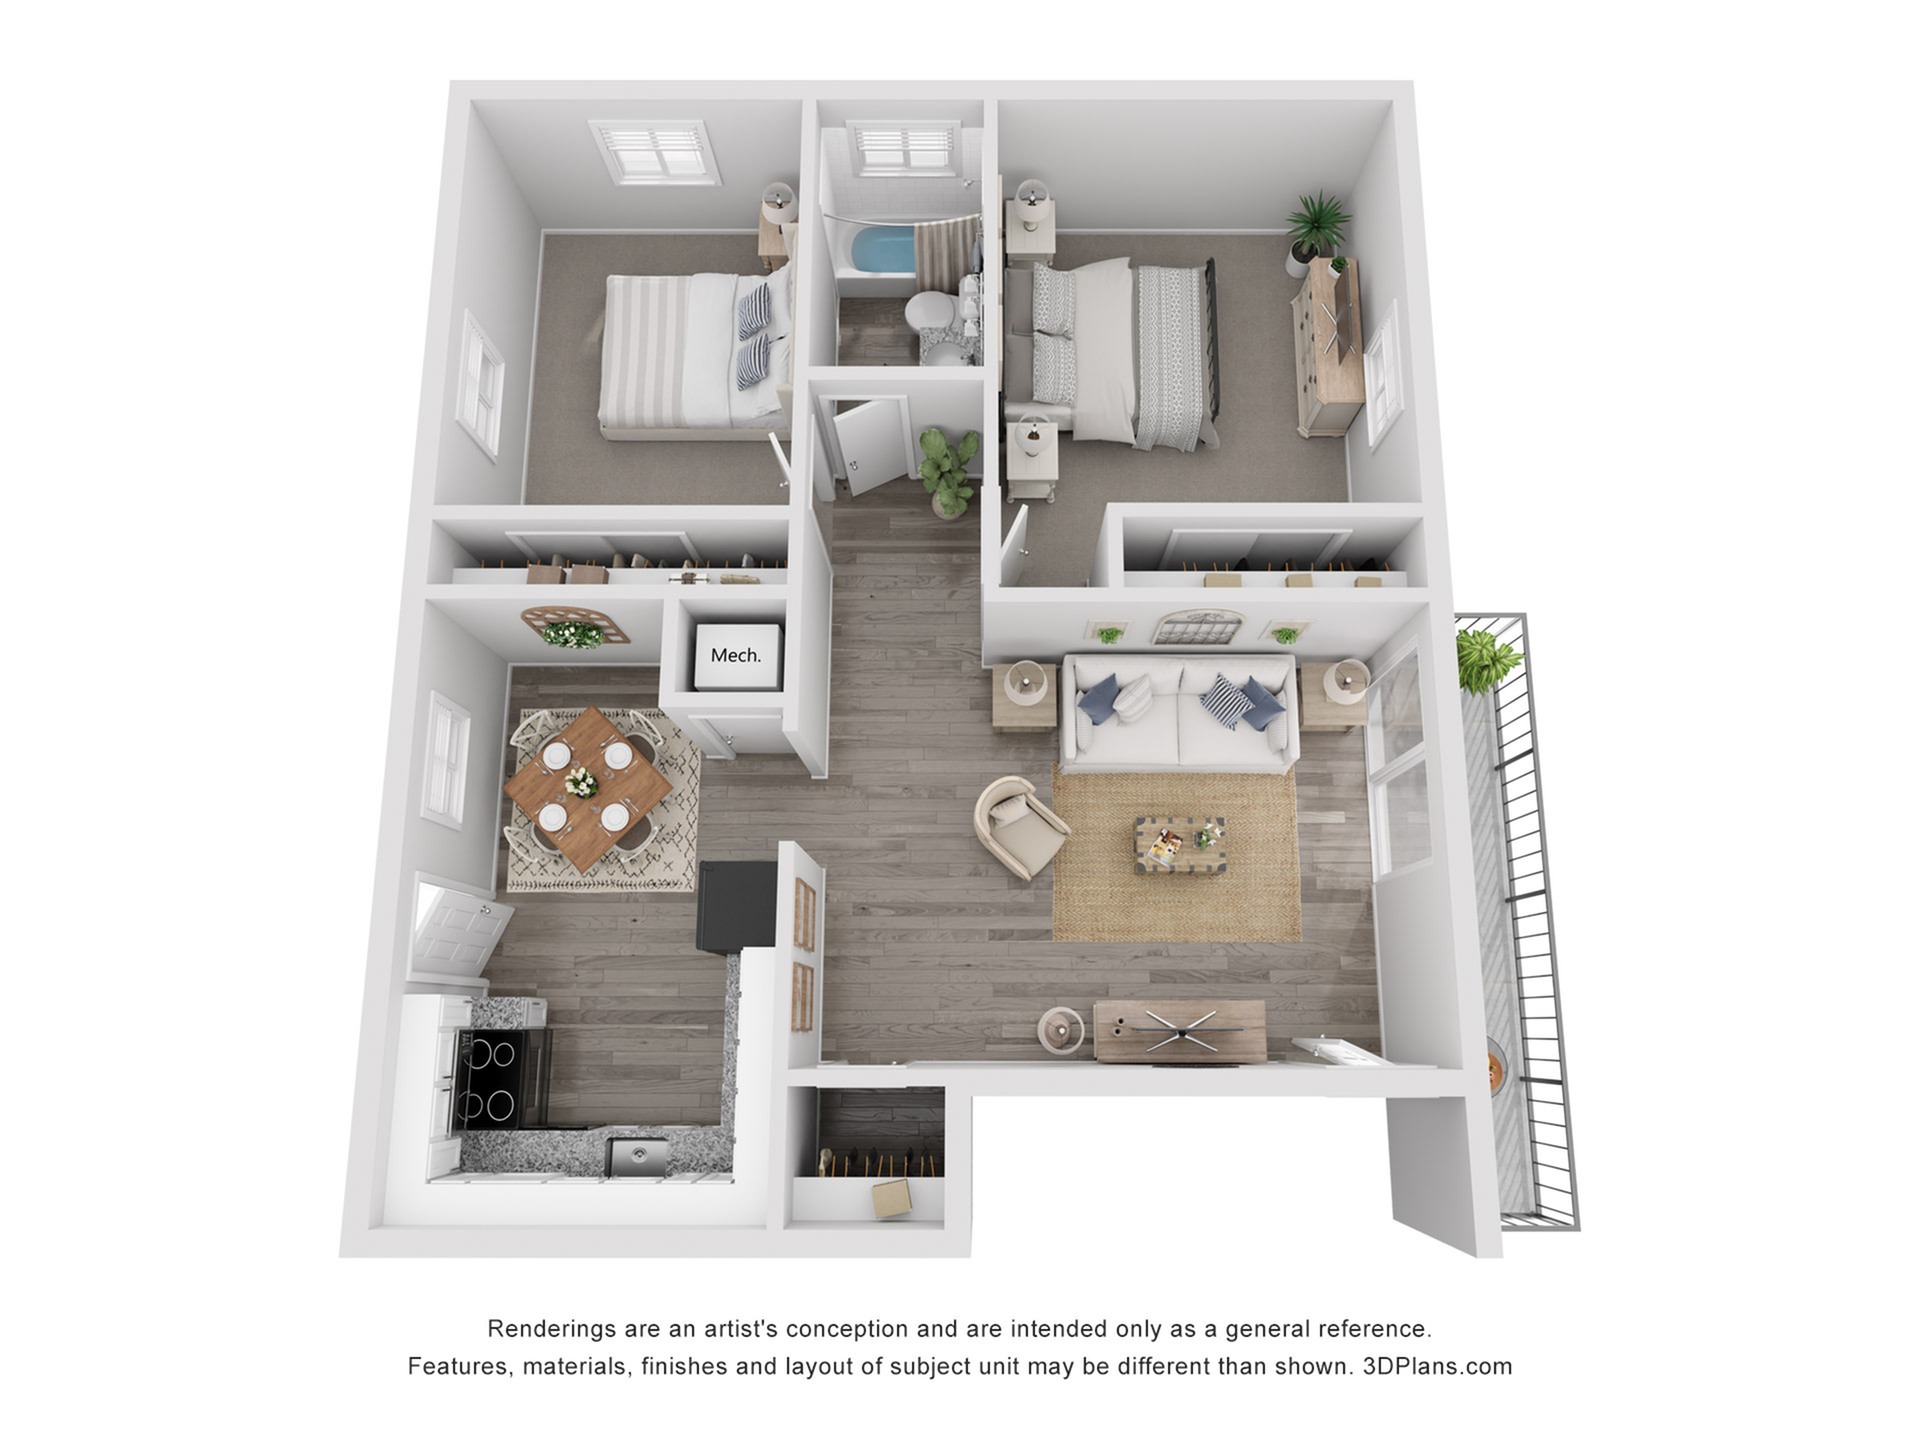 2 bed 1 bath floorplan with plank style flooring, large rooms, eat in kitchen, full appliance package